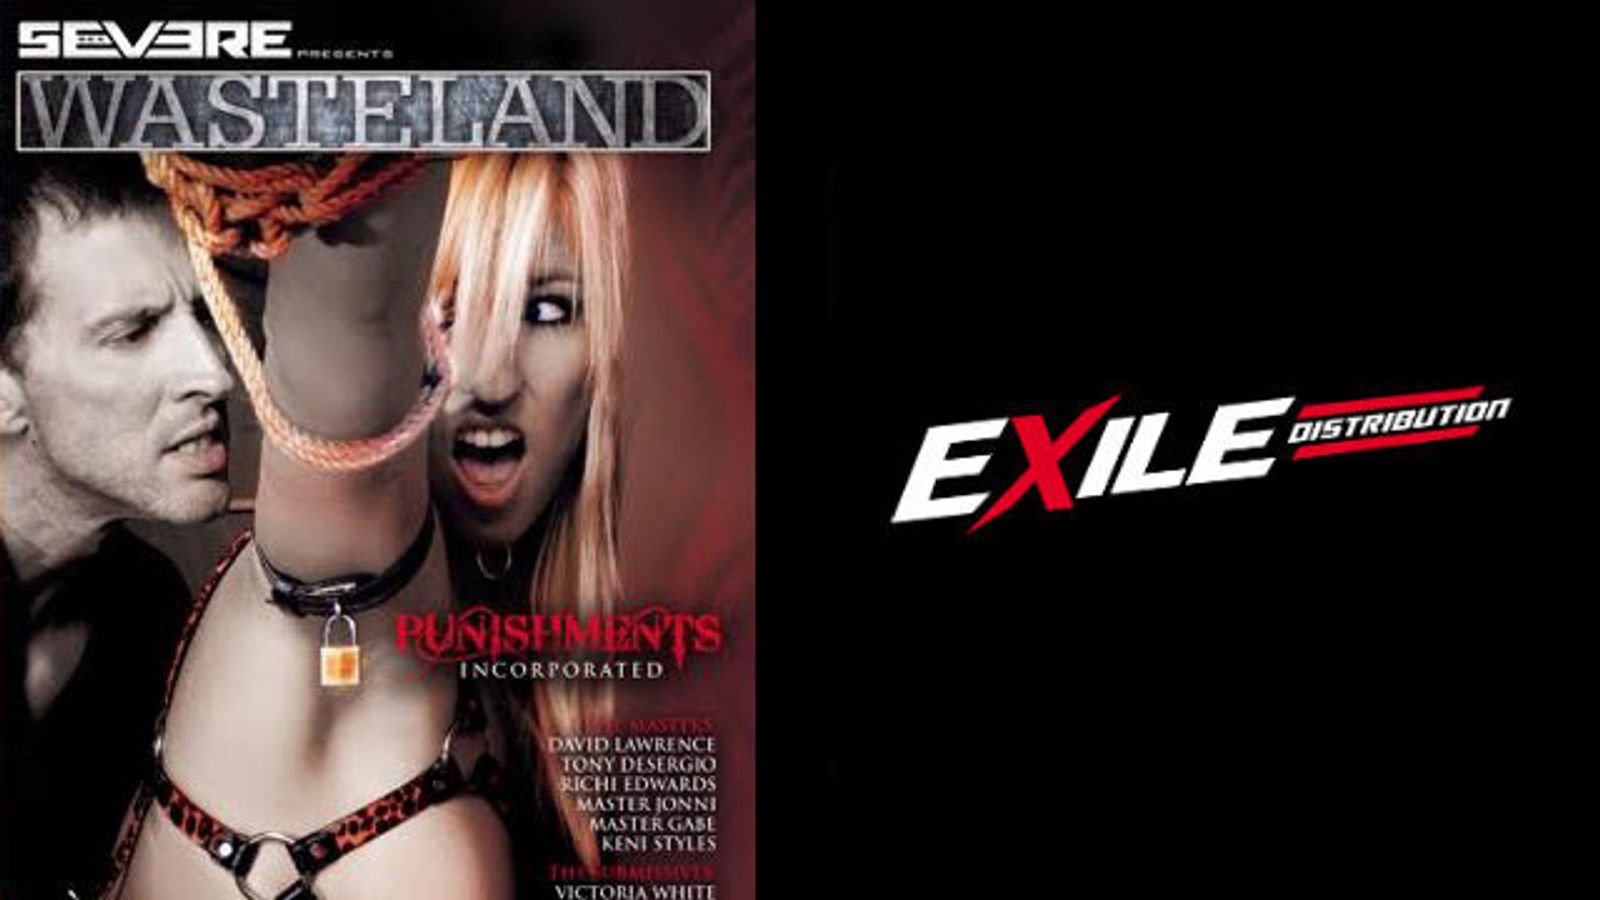 Wasteland Teams With Severe Sex, Exile for DVD Line